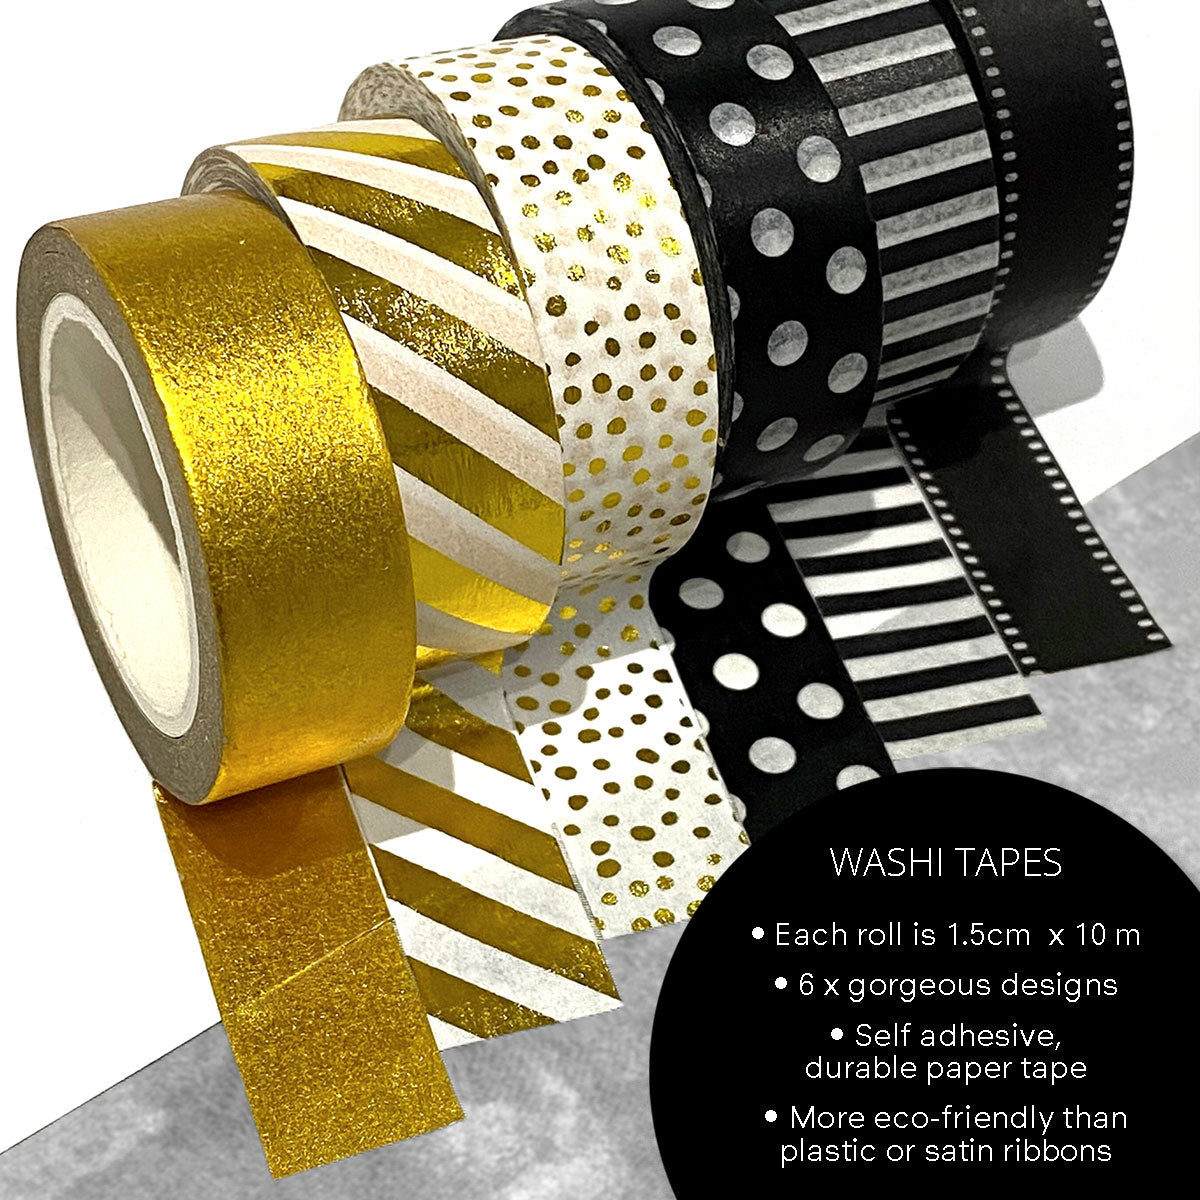 Washi Tapes in Gold + Black and White Designs